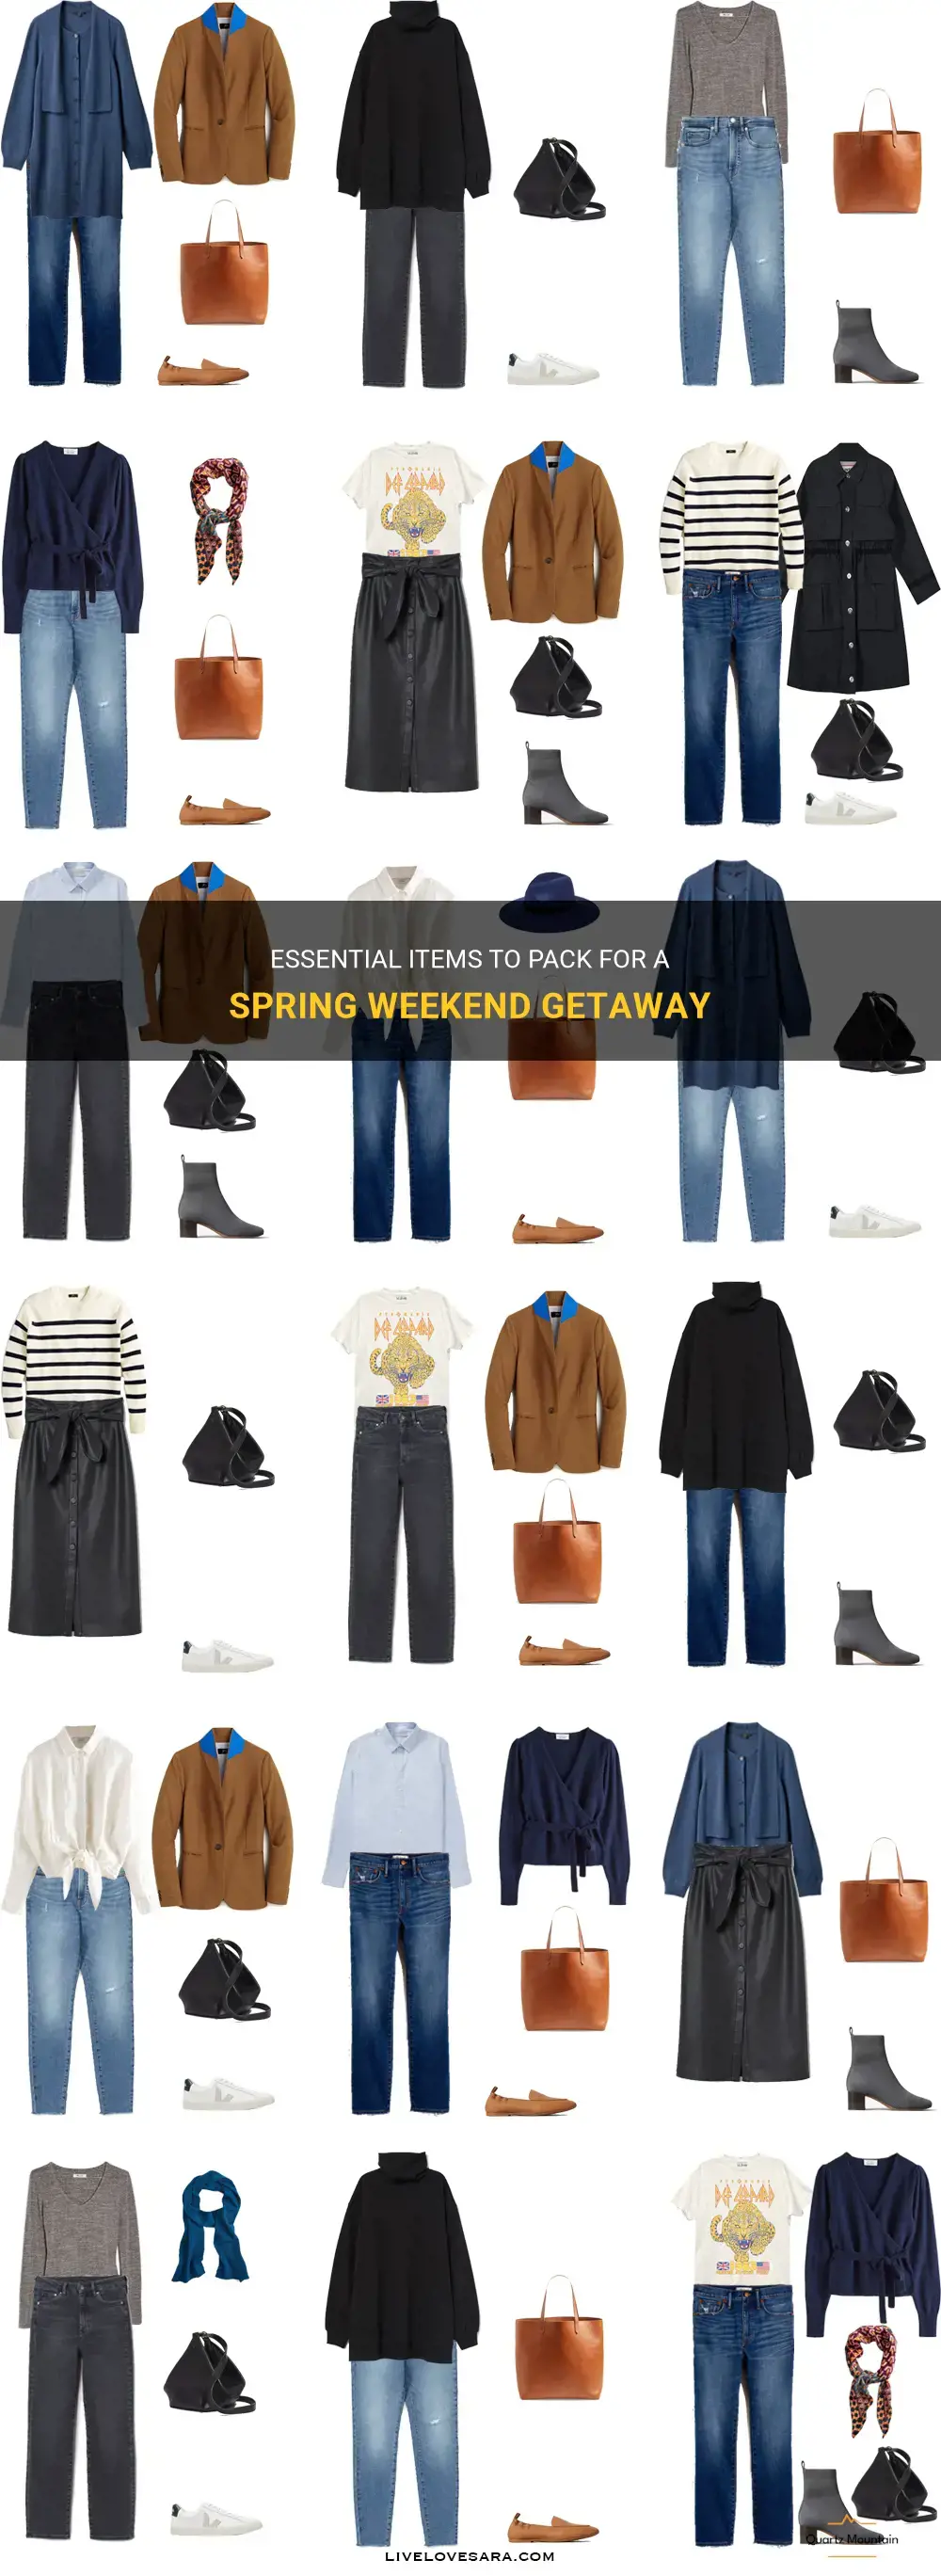 what to pack for a weekend away in spring